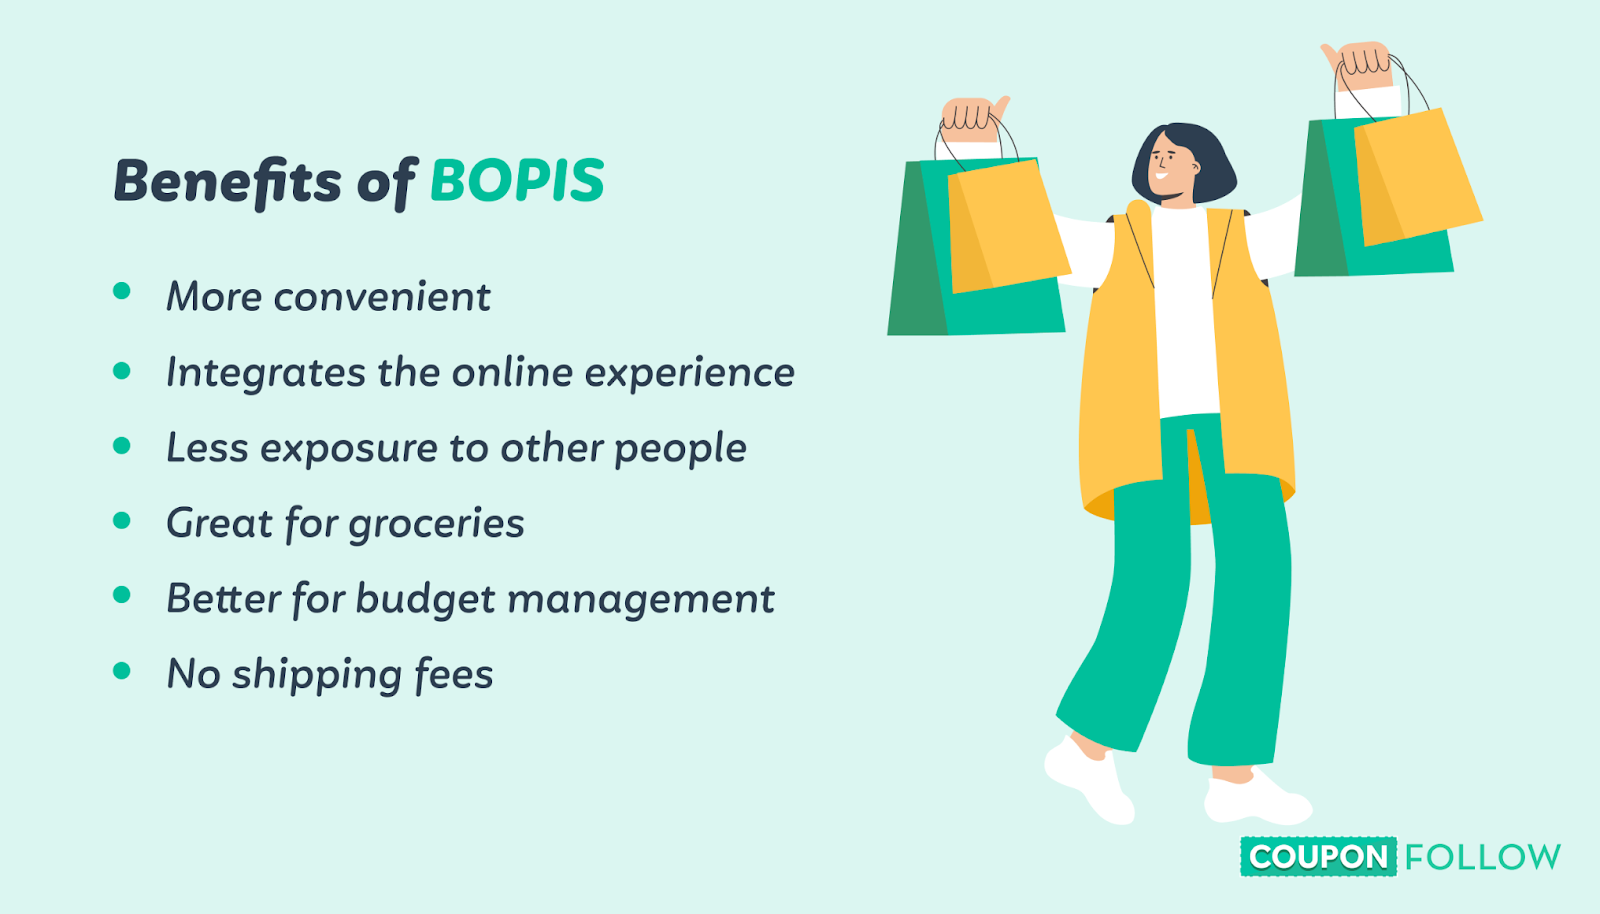 A list of the benefits of BOPIS for customers